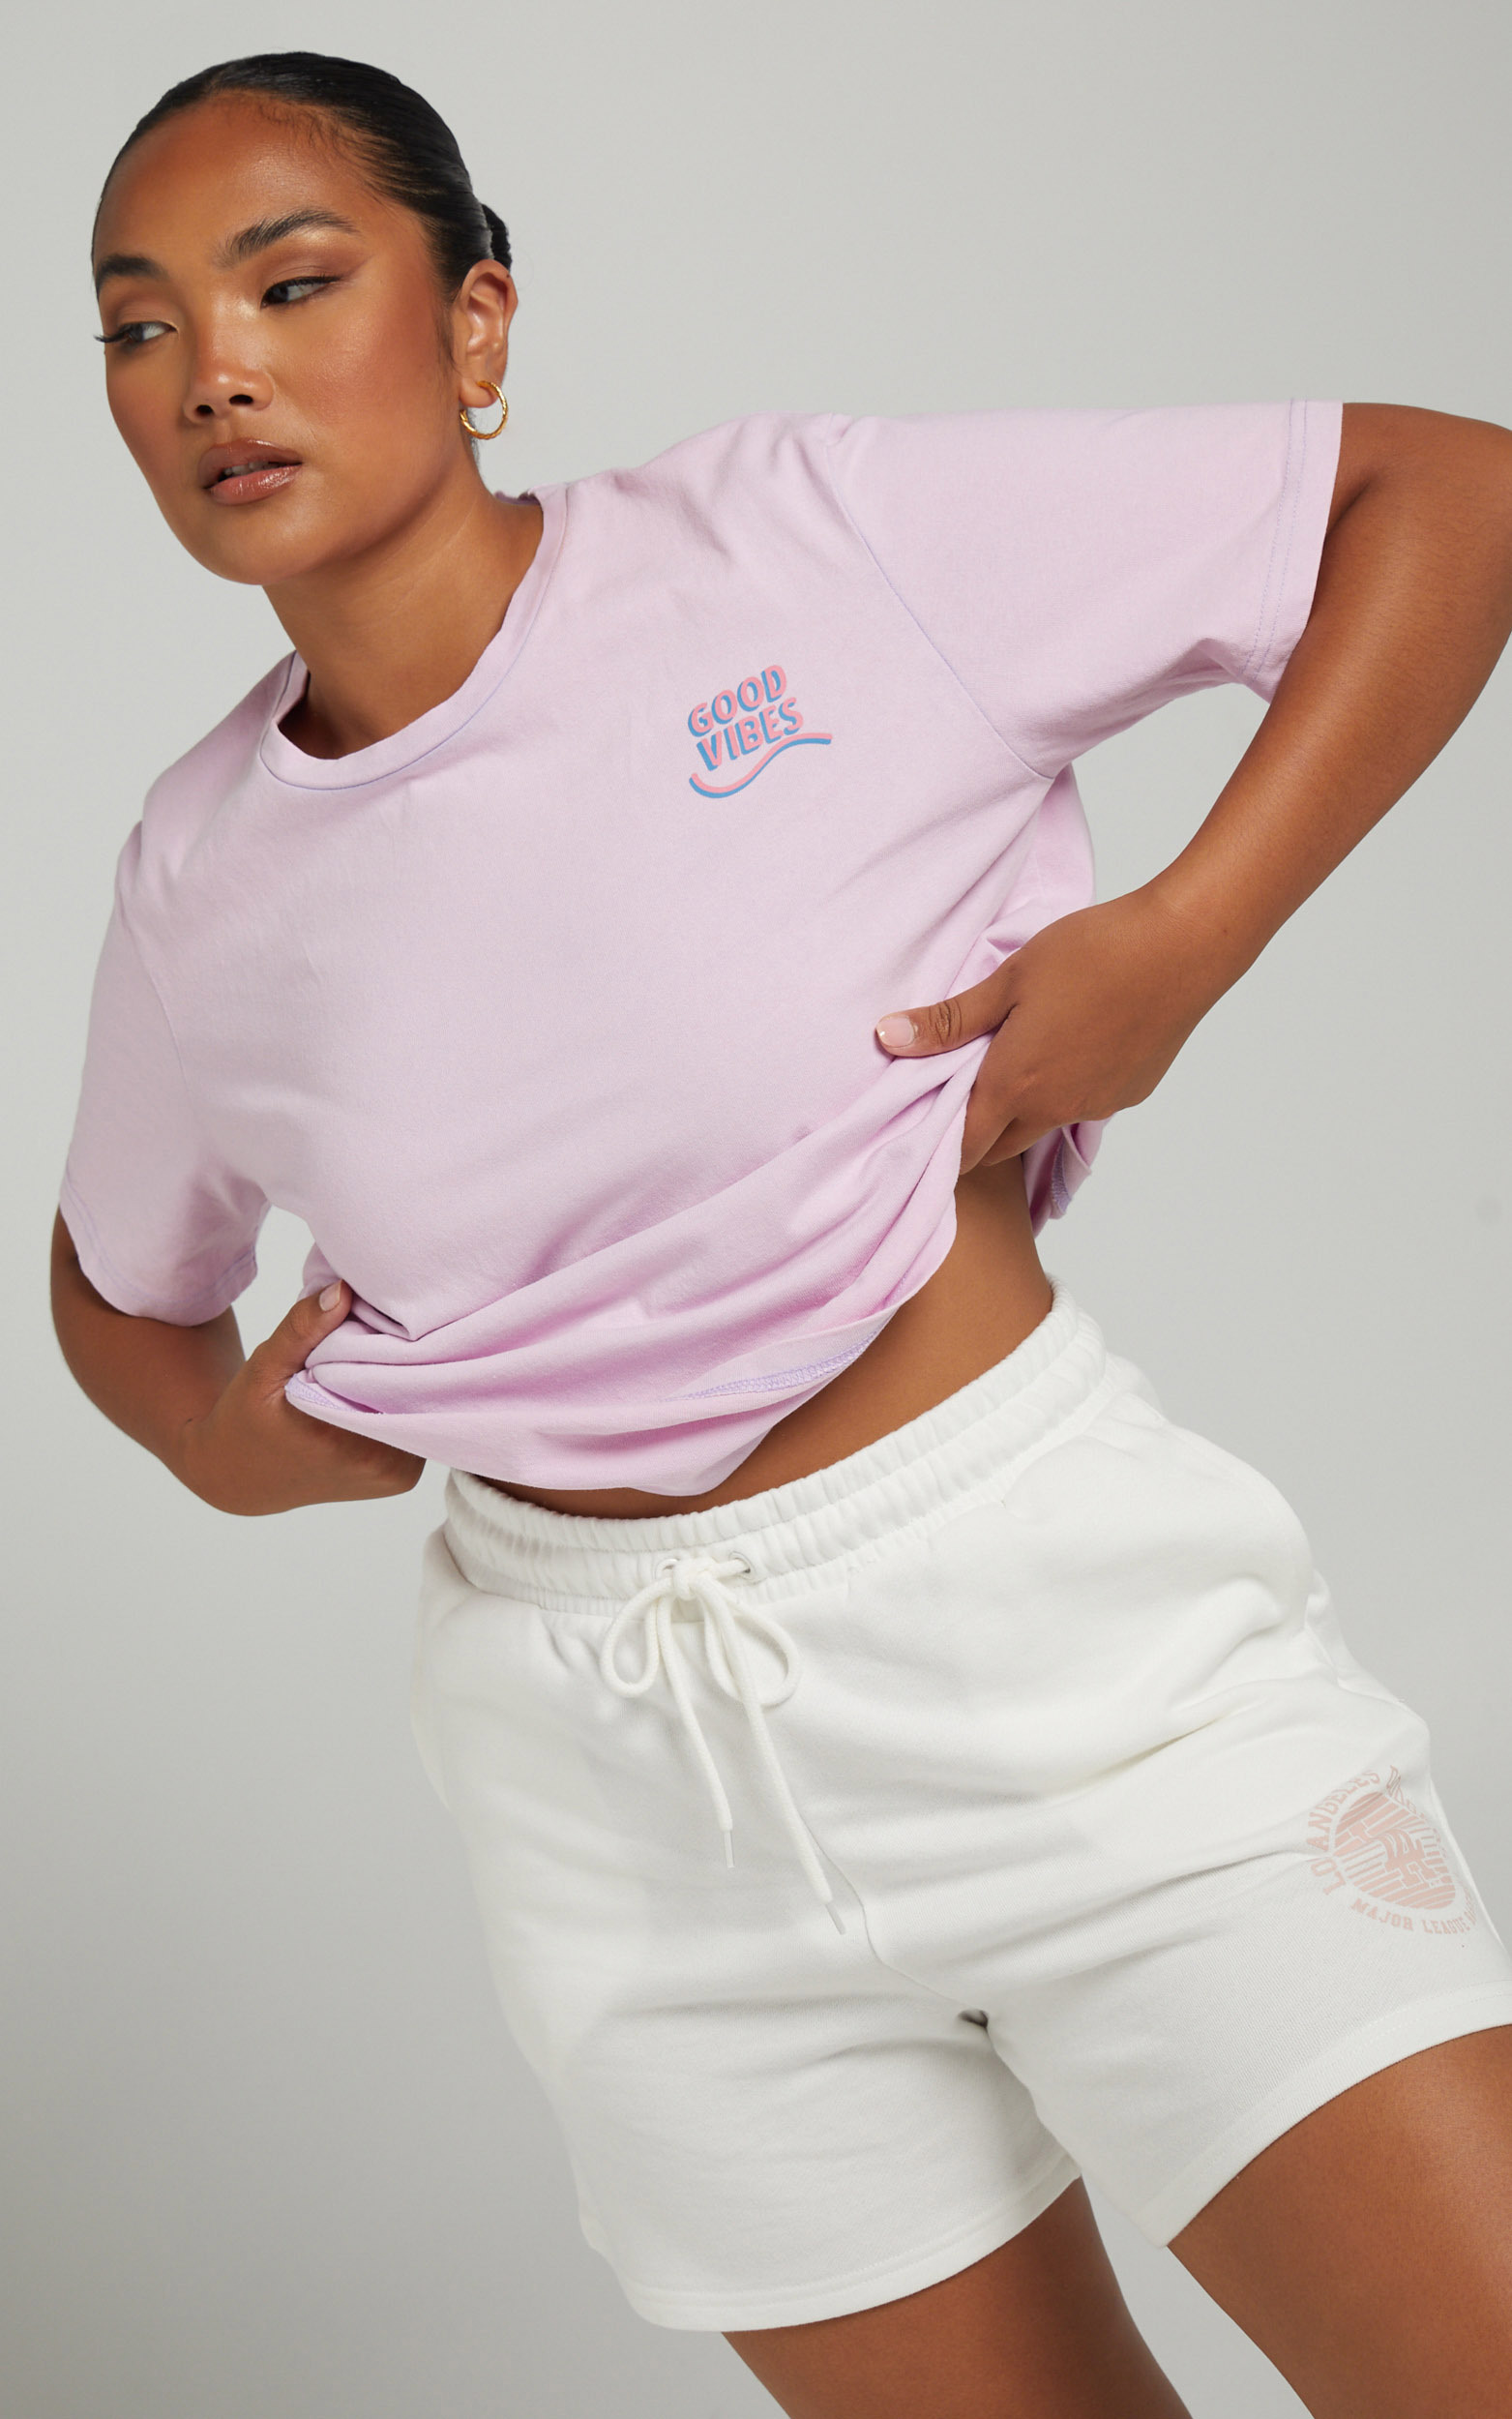 Catch My Vibe Graphic T Shirt in Lilac - 04, PRP1, hi-res image number null